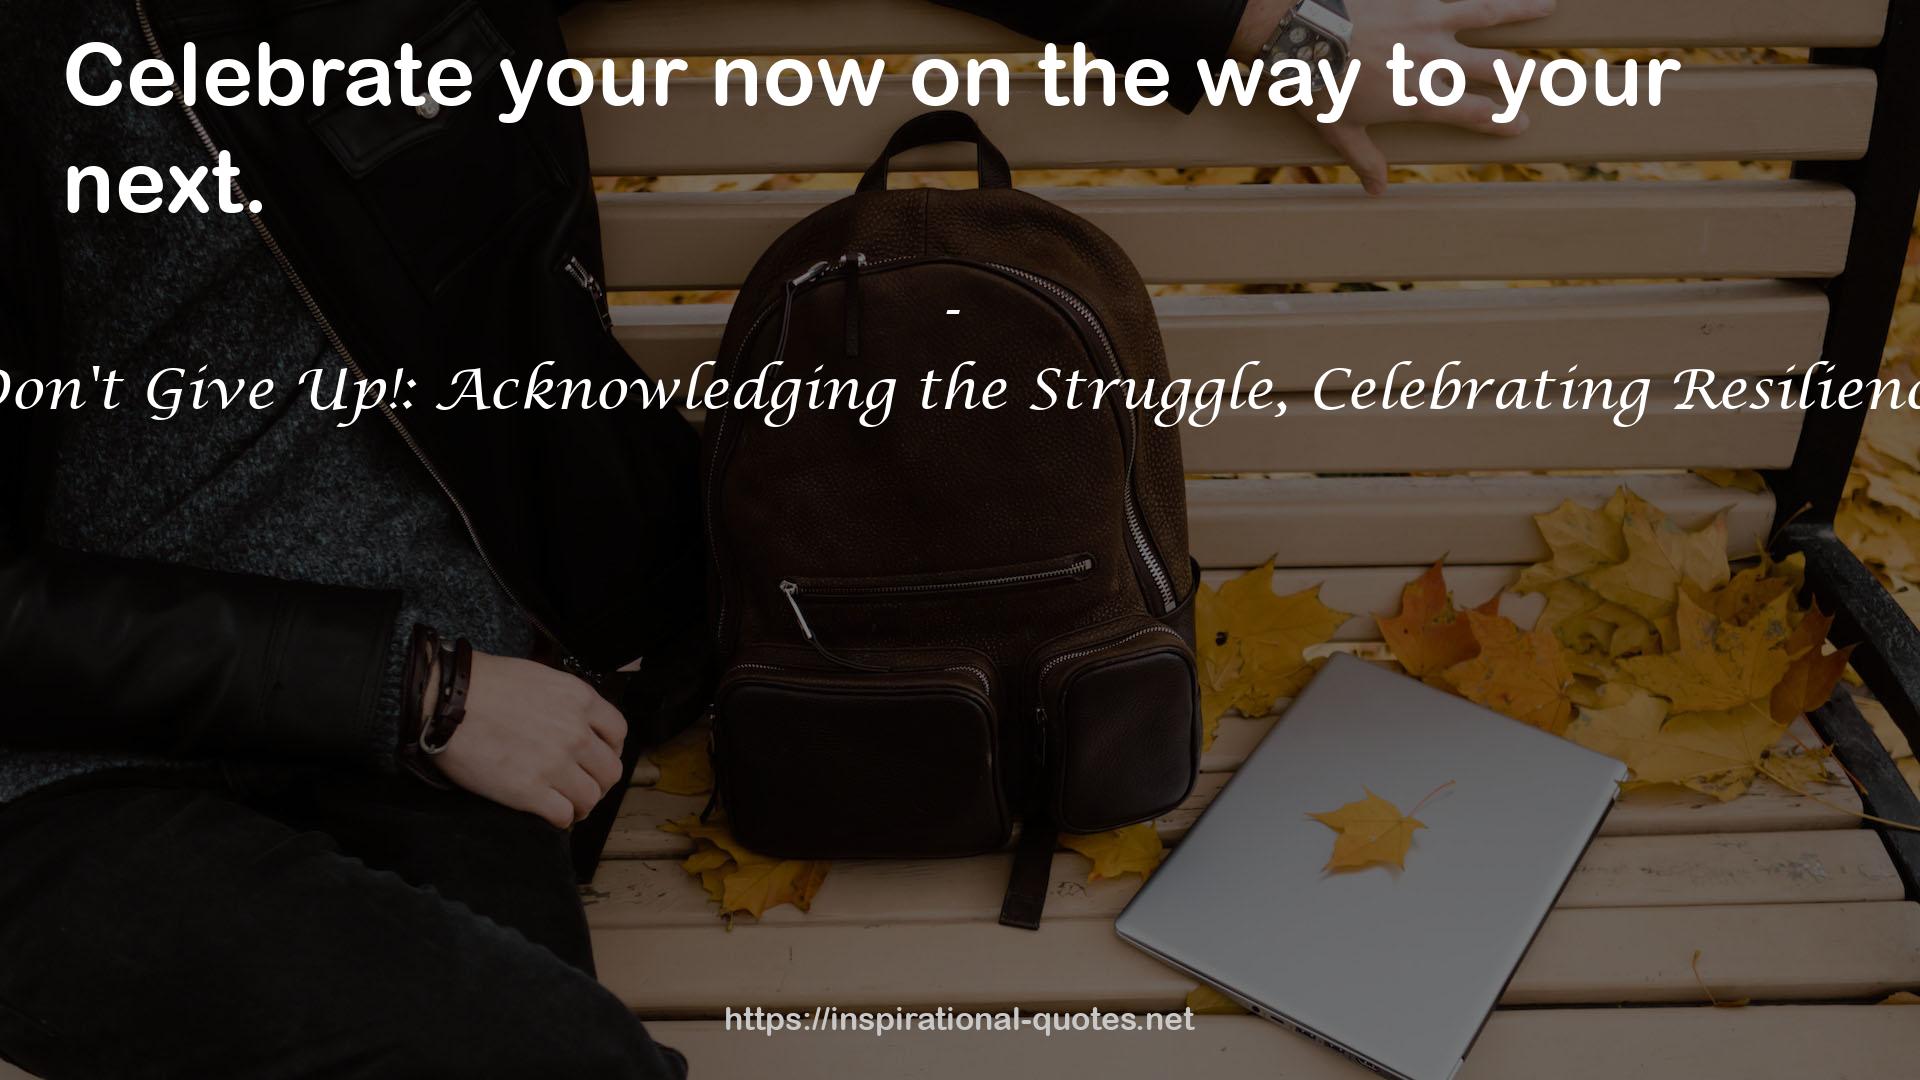 Don't Give Up!: Acknowledging the Struggle, Celebrating Resilience QUOTES